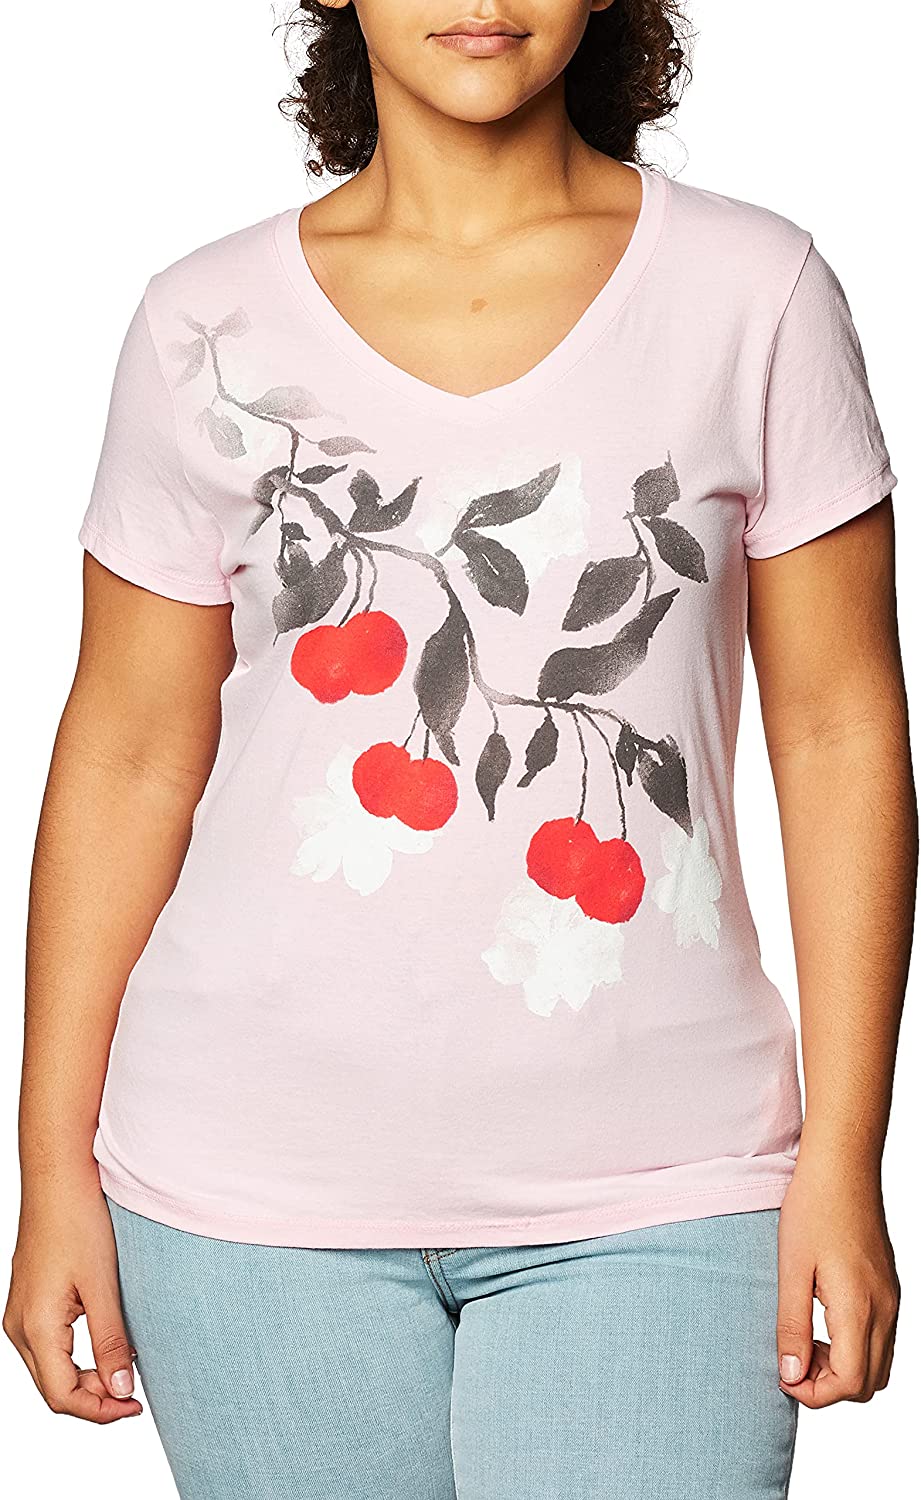 multiple graphics available Hanes Women’s Short Sleeve Graphic V-neck Tee